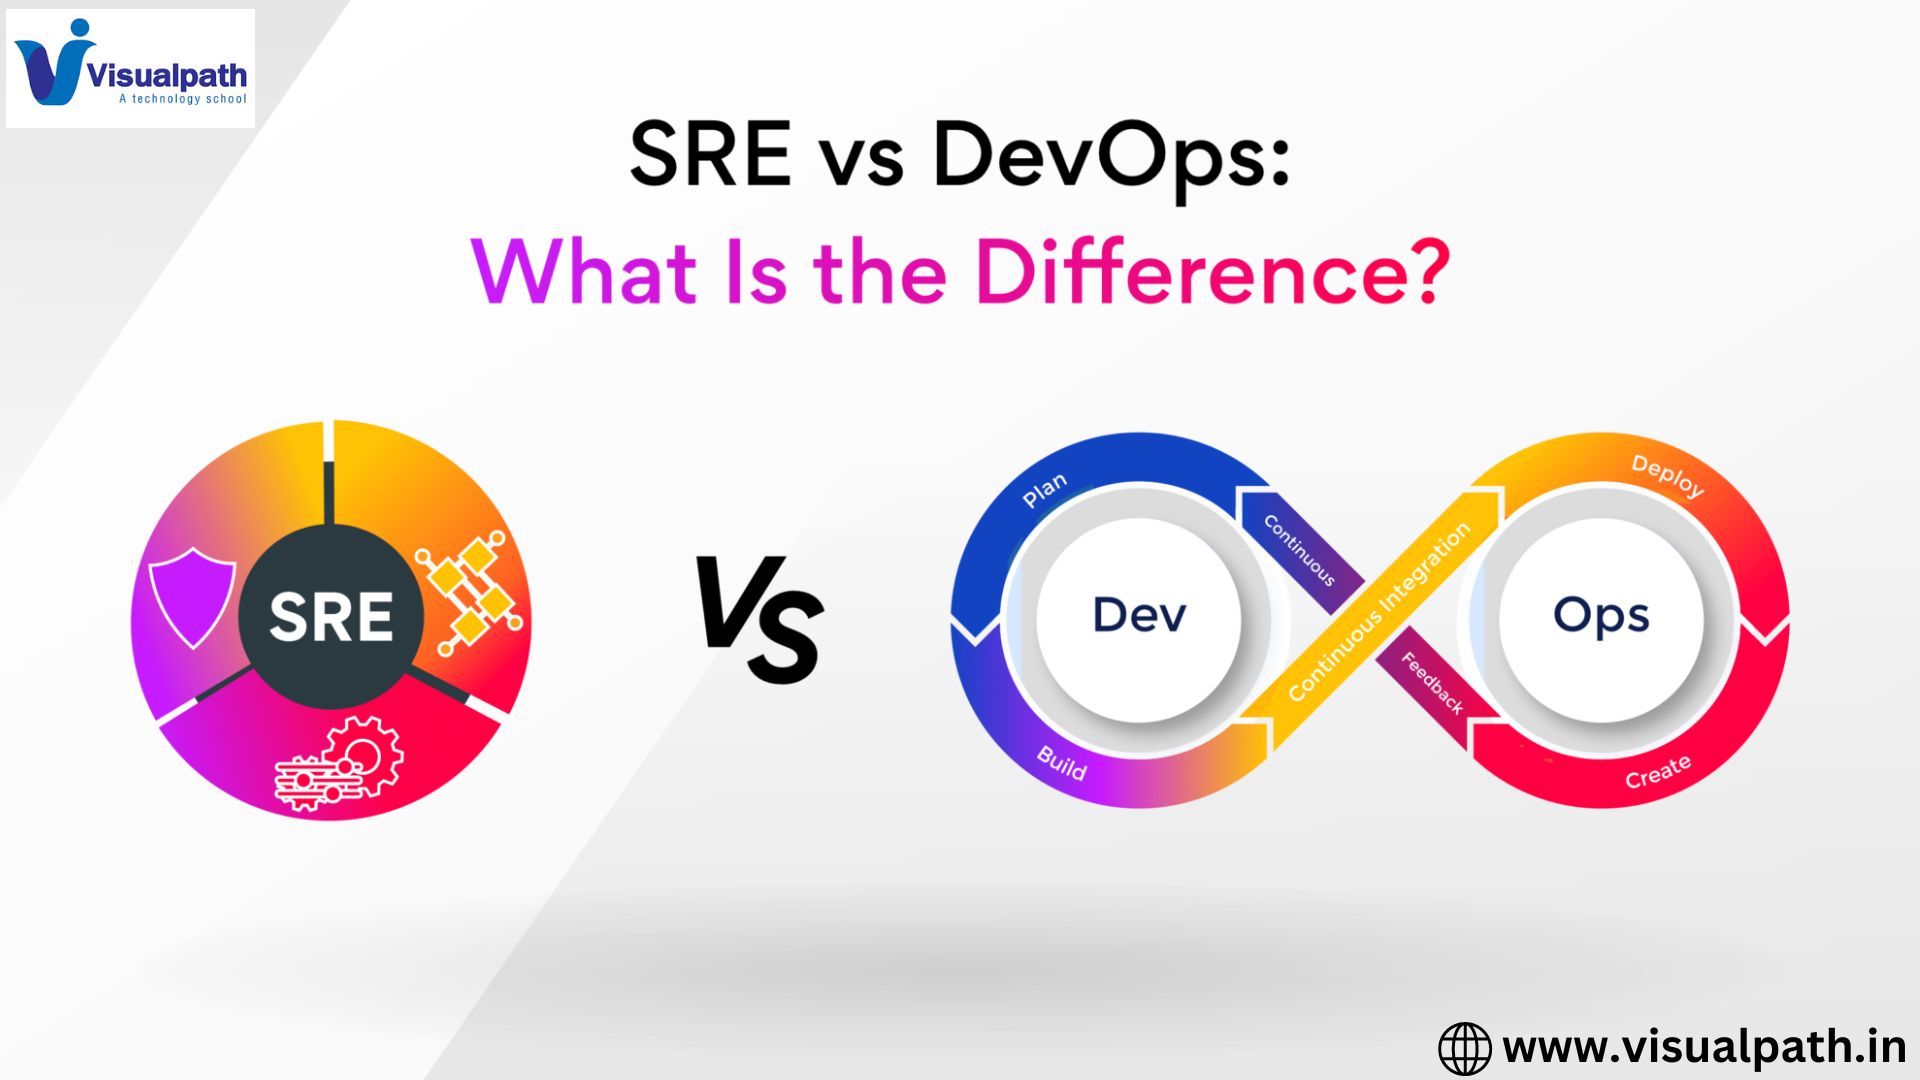 SRE vs DevOps: What’s The Difference?